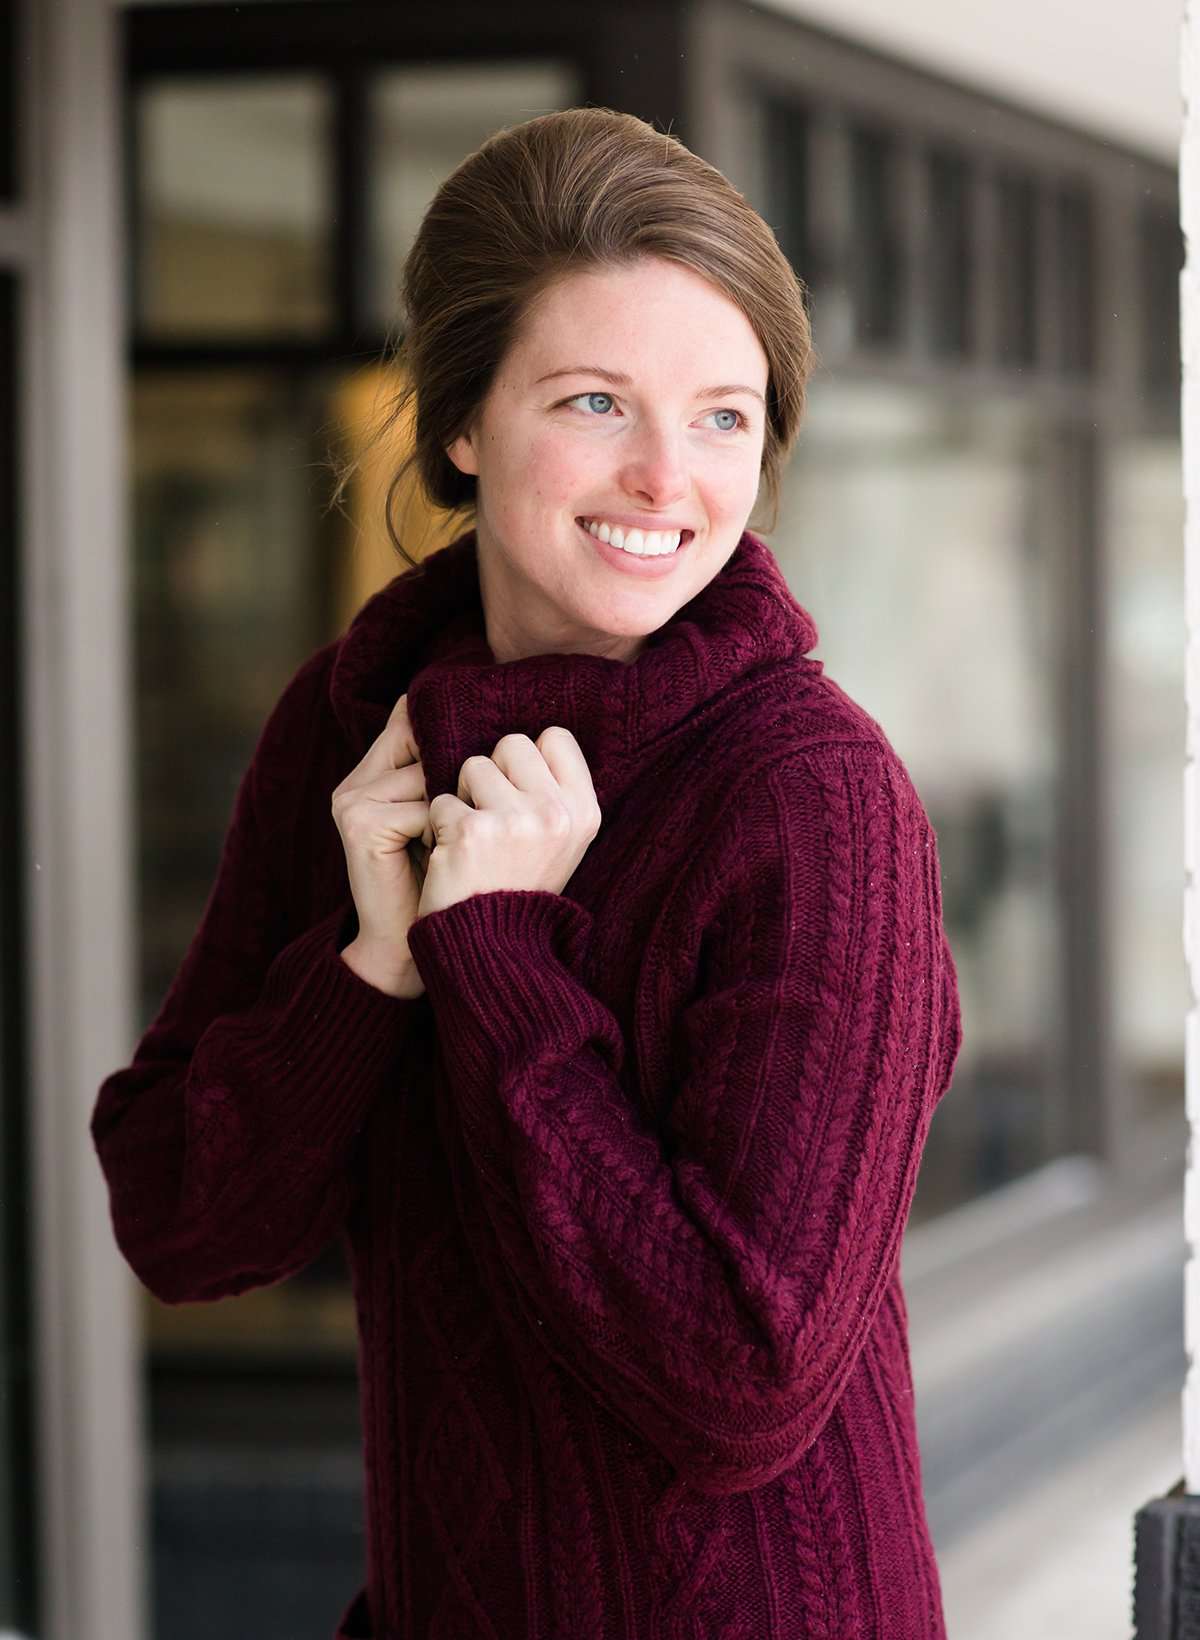 Woman wearing a cableknit, cowlneck sweater dress in taupe or burgandy. This cozy dress is below the knees and paired with tall, suede riding boots.